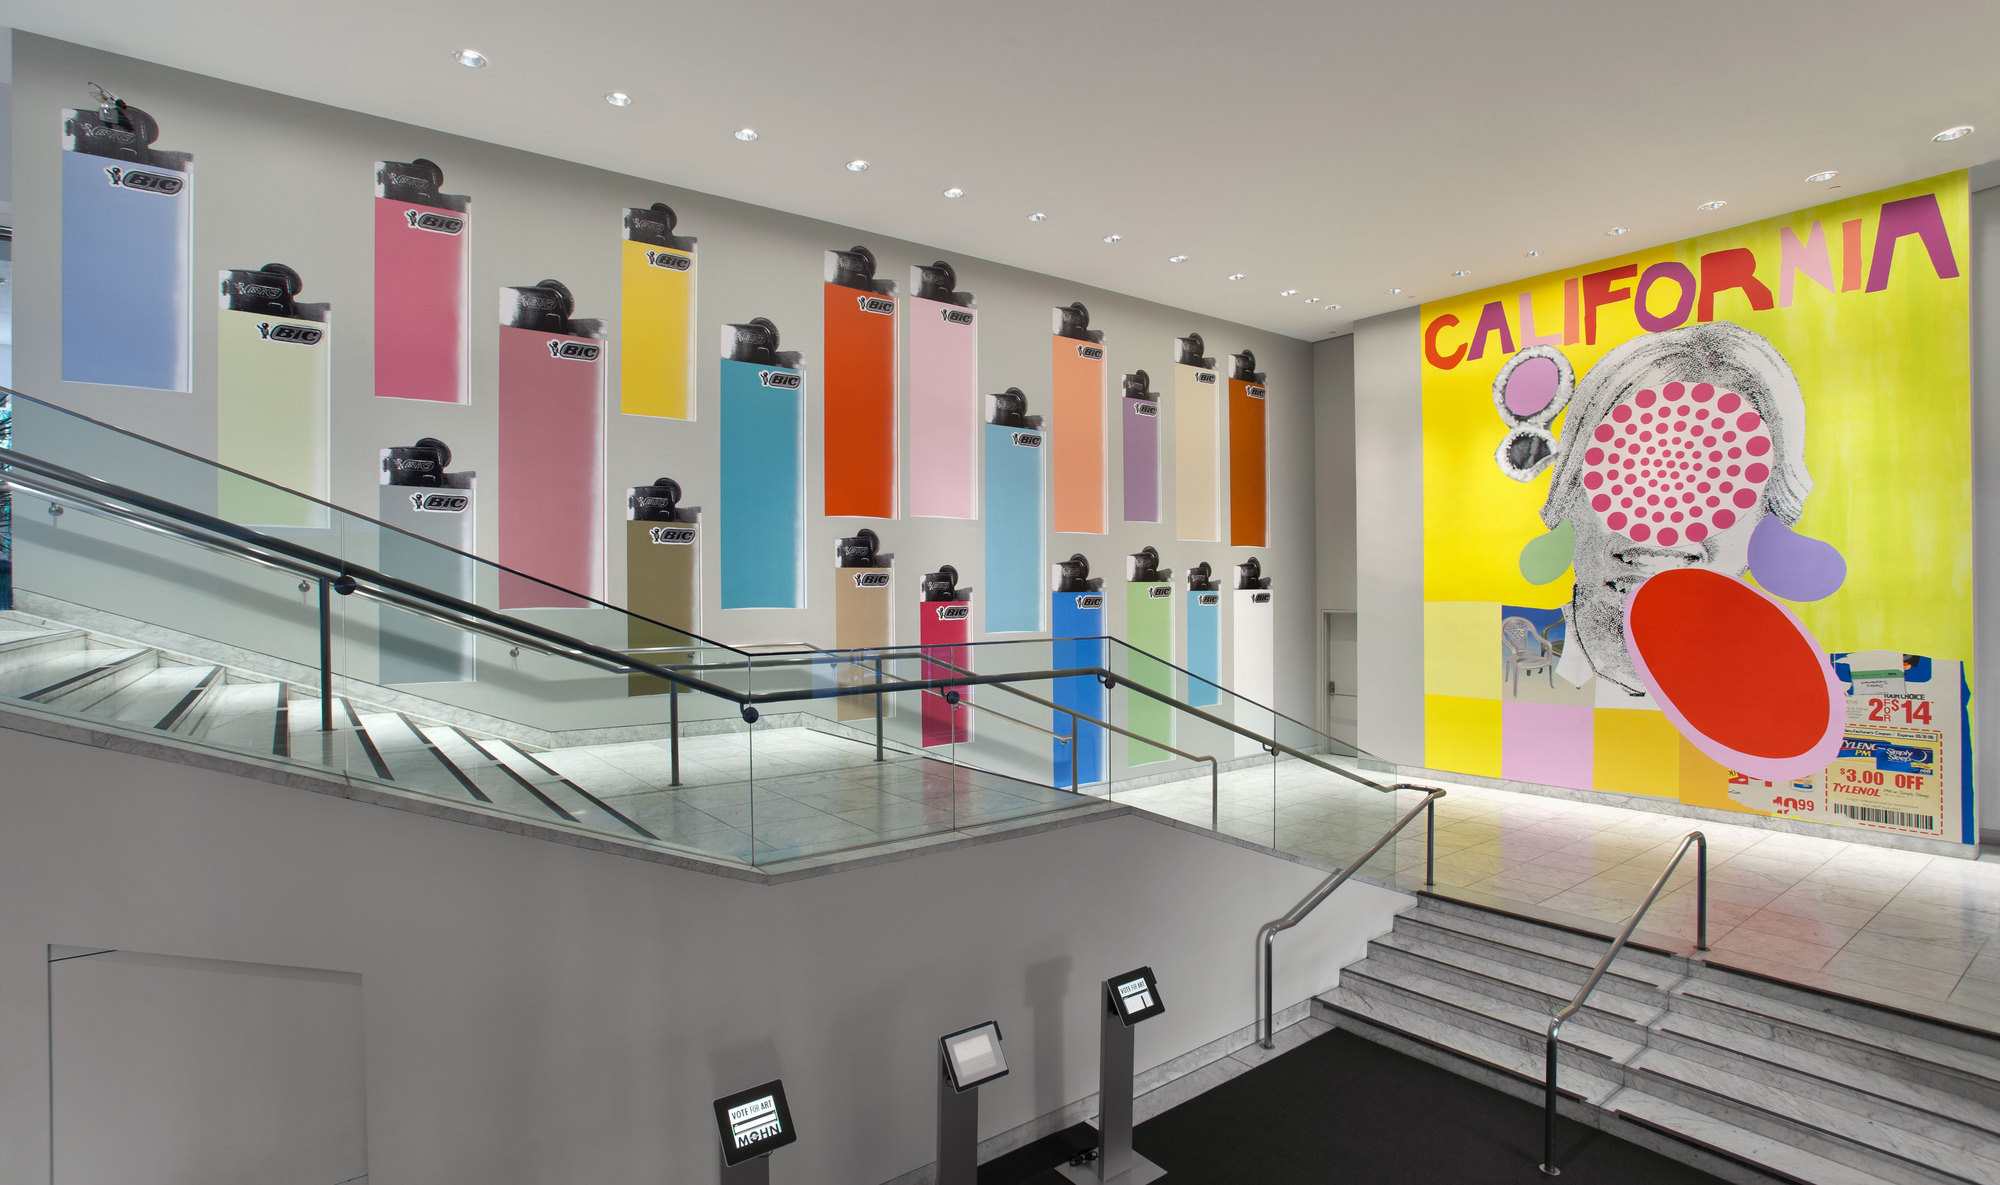 Meg Cranston, <em>Made in L.A. 2012</em> installation view at the Hammer Museum, Los Angeles. Photo by Brian Forrest.